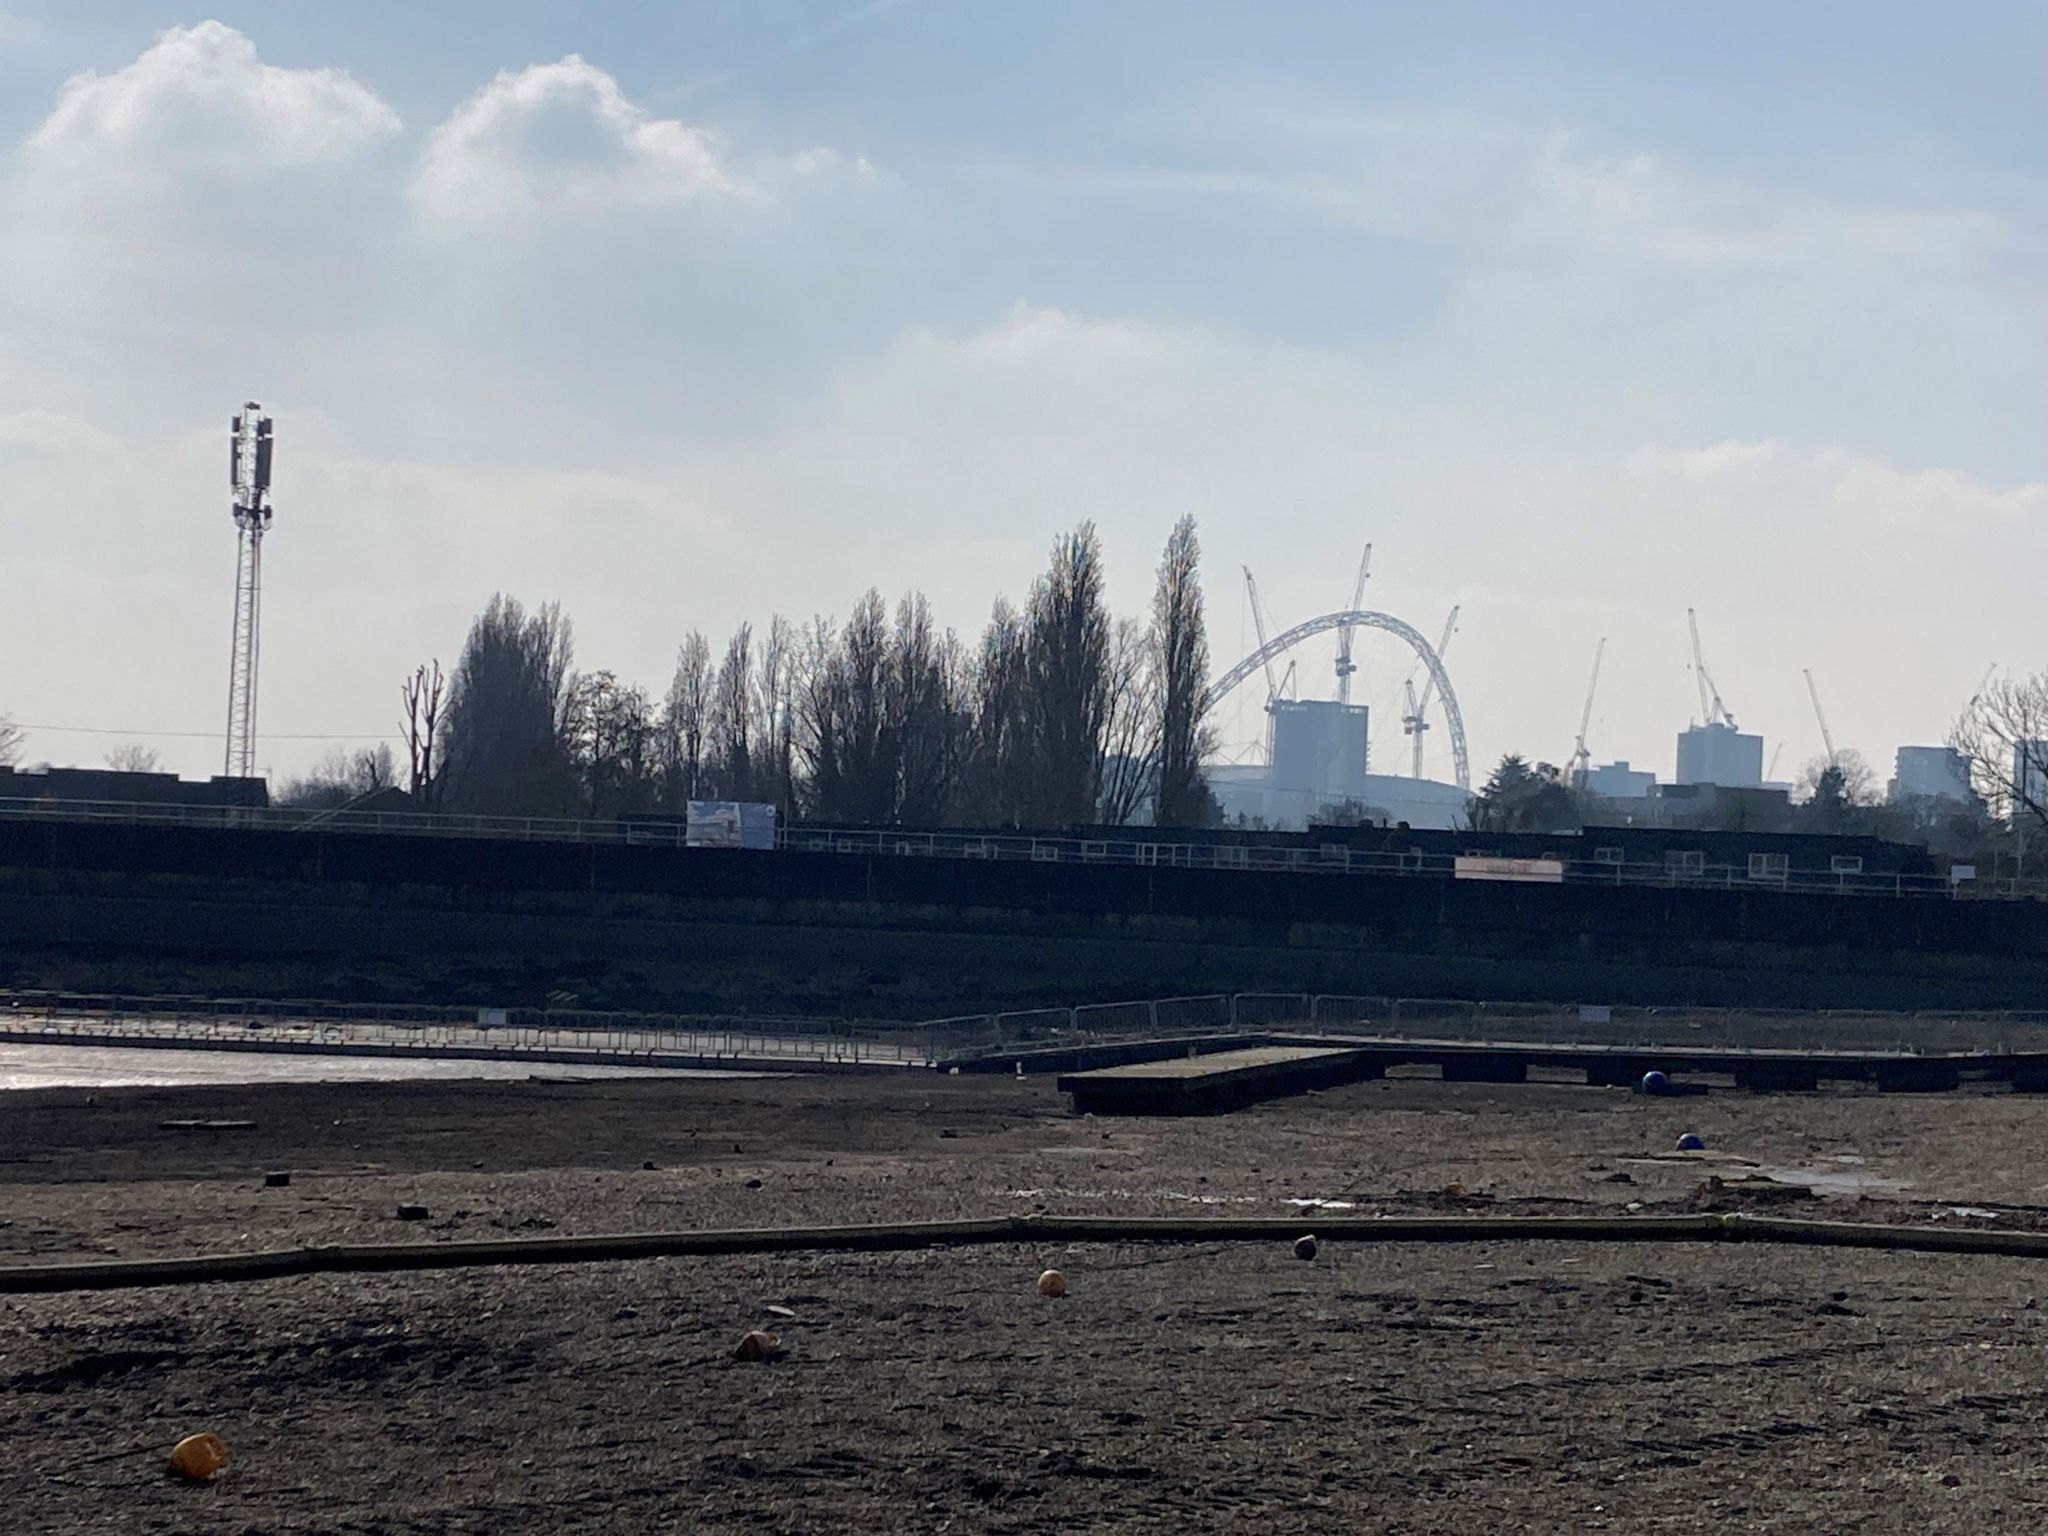 The Wembley Stadium arch as seen from the drained reservoir